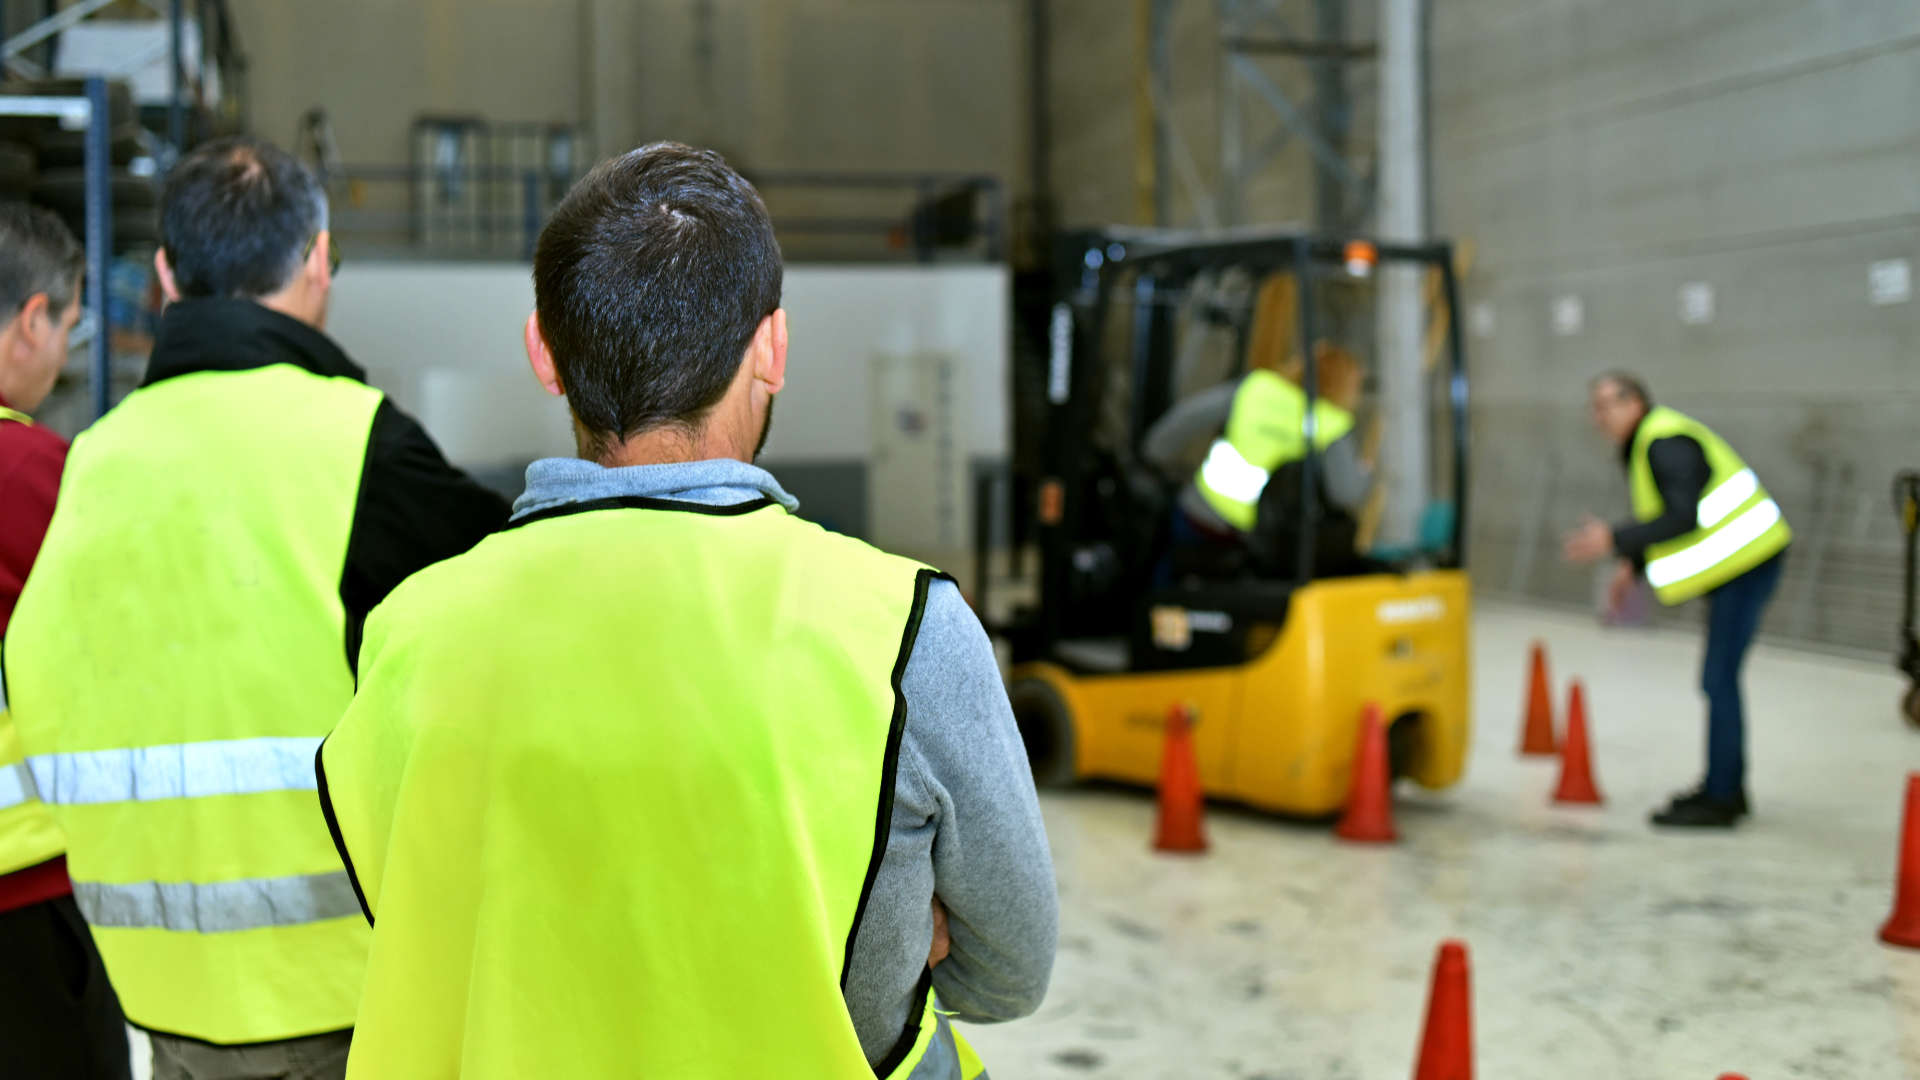 Health and safety training in the workplace